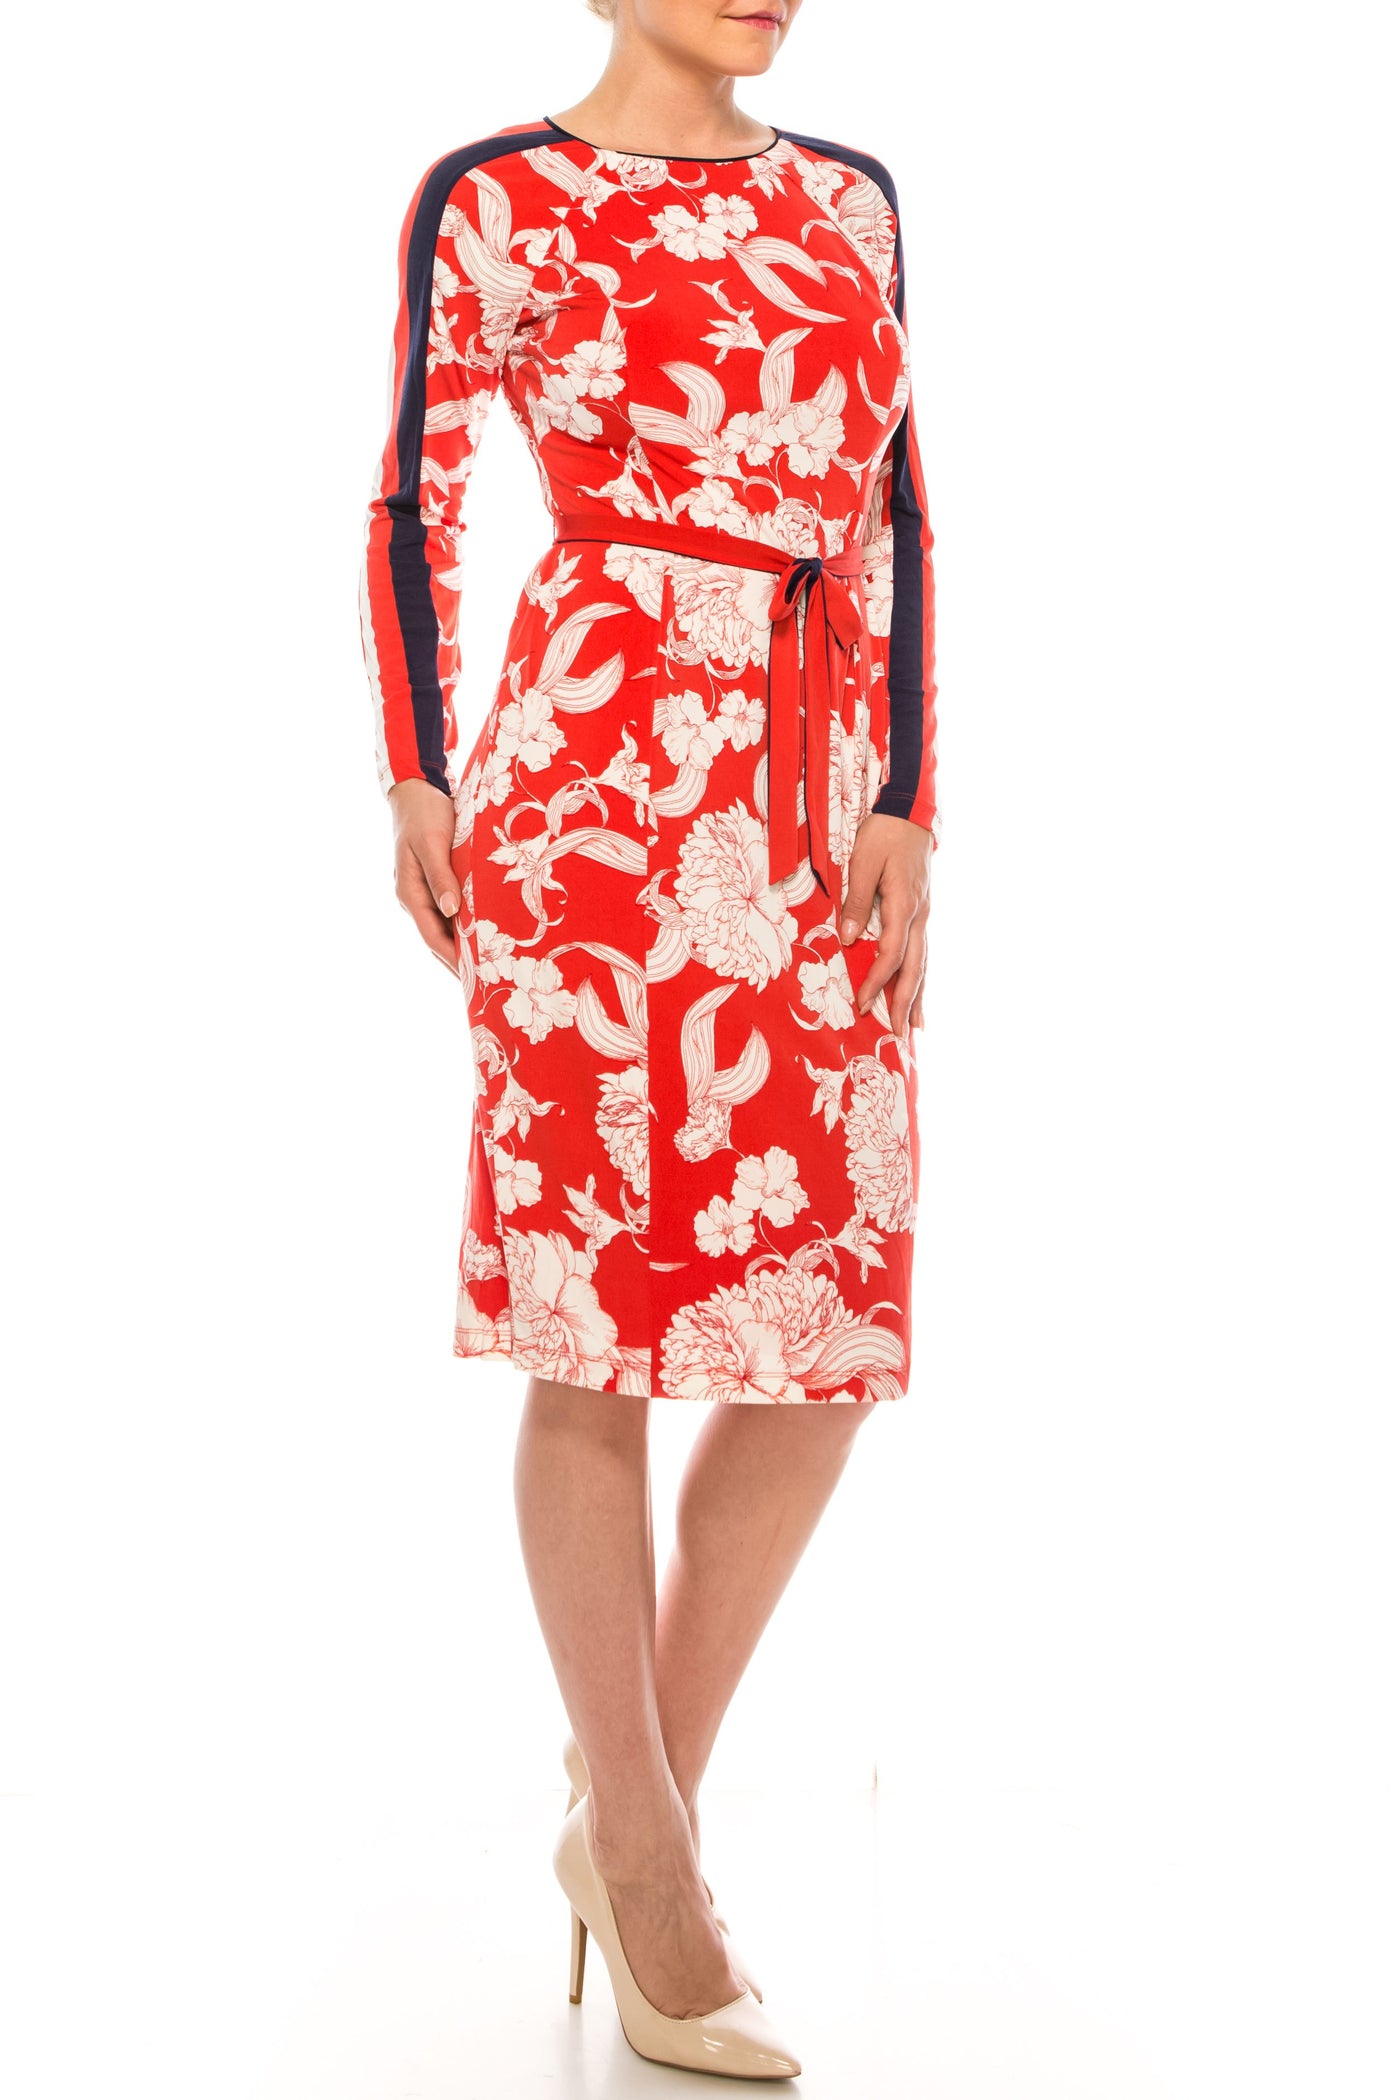 Maggy London - G4327M Jewel Floral Printed Dress In Red and Blue